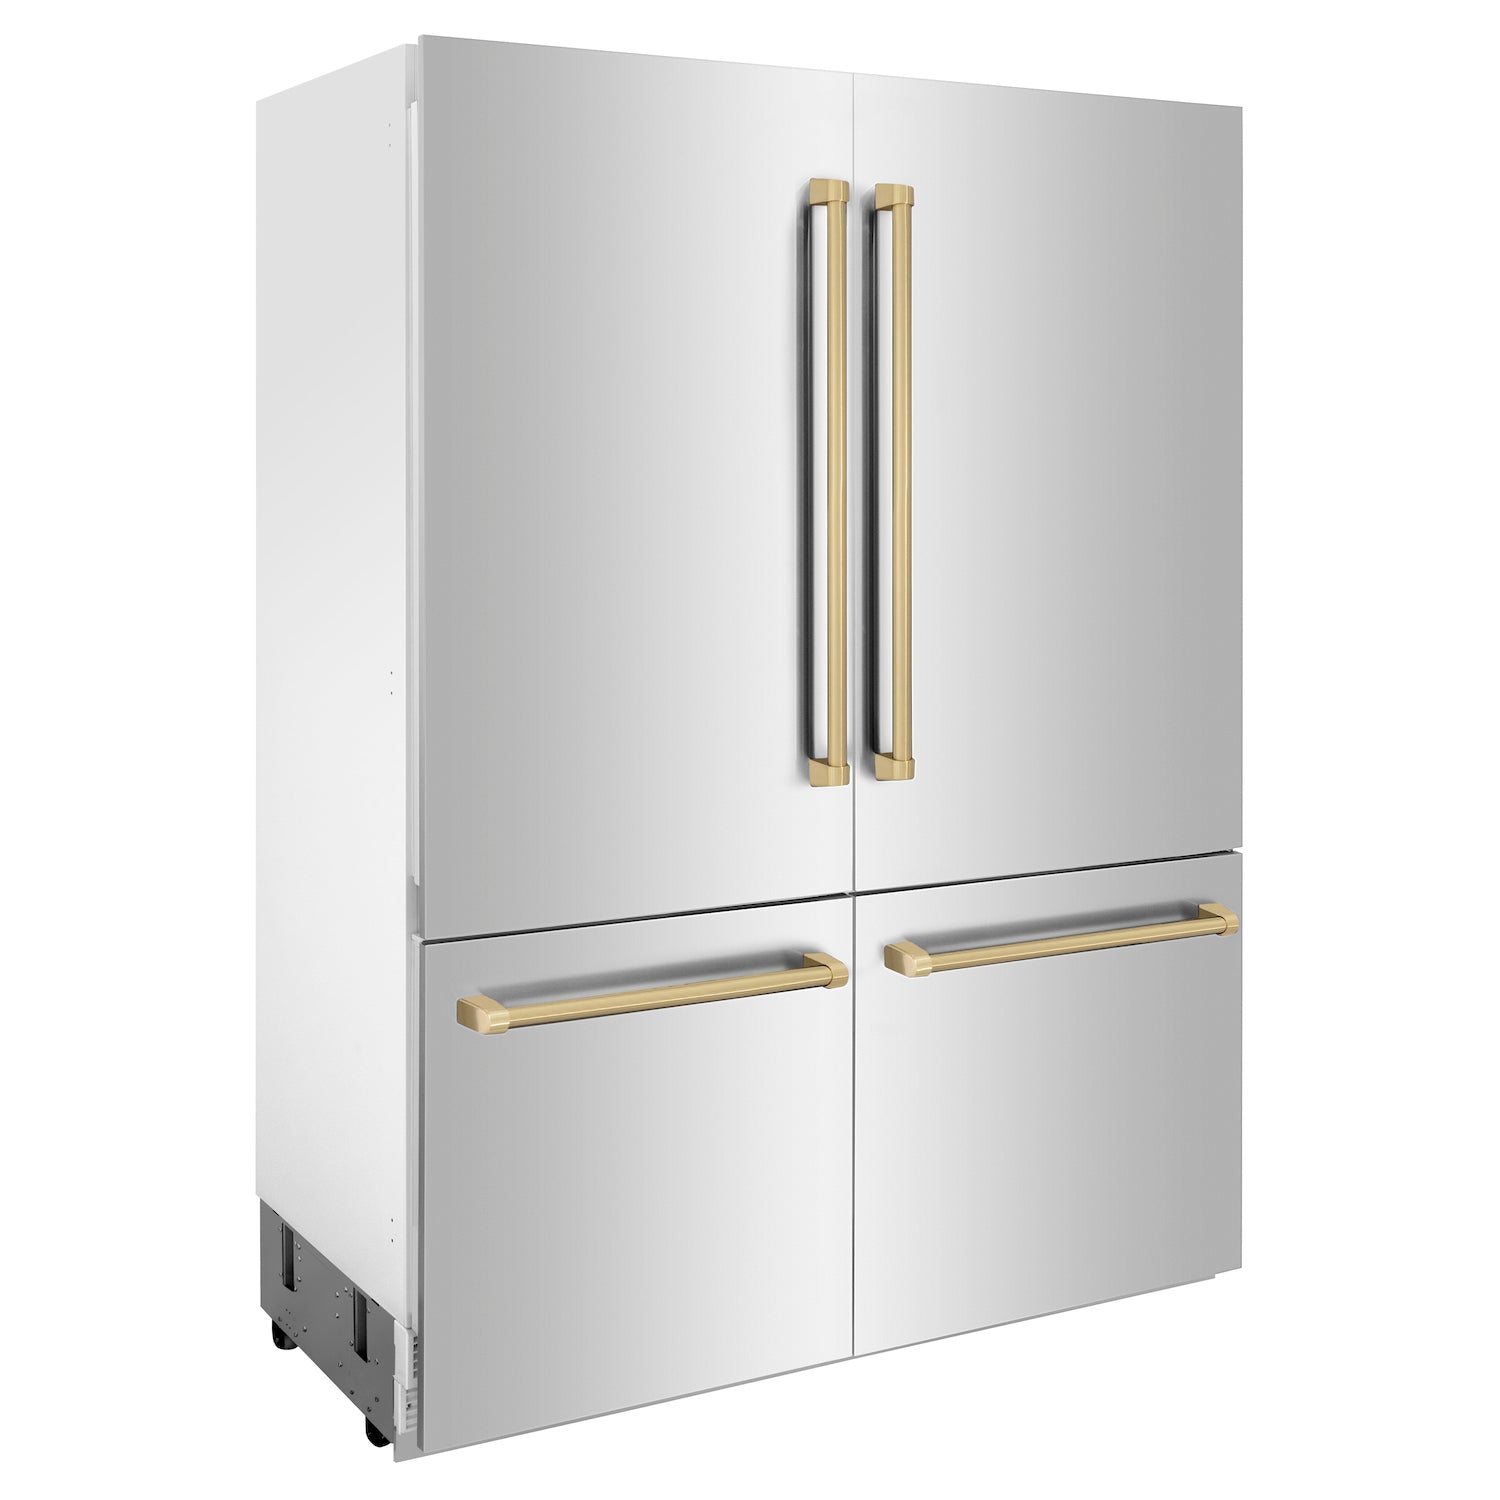 ZLINE 60" Autograph Edition Built-in Refrigerator with Stainless Steel Panels and Accent Handles side.